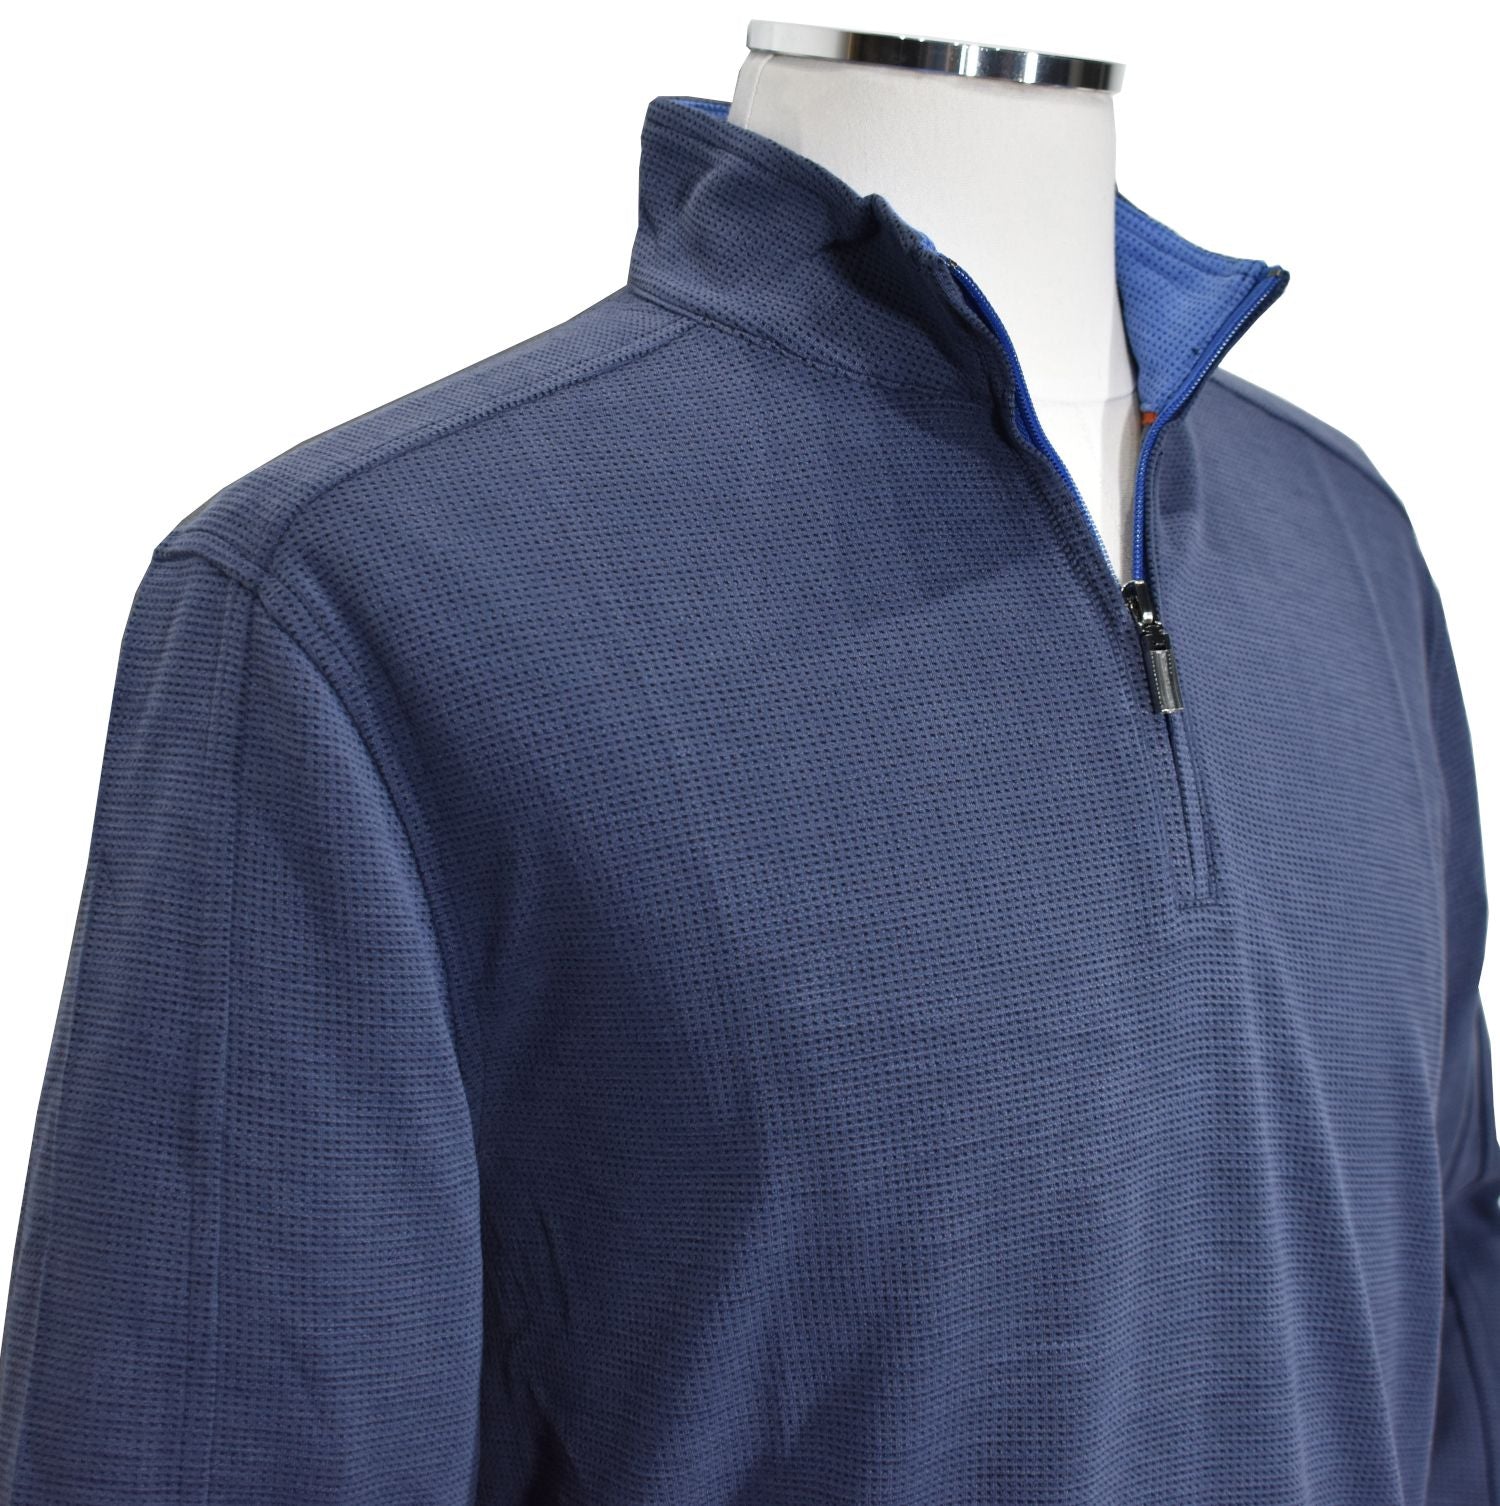 Look sharp in any occasion with this cool 1/4 zip model. Crafted from polynosic fabric, its perfect weight and feel pair perfectly with its waffle weave textured fabric and classic fit. Choose from Red, Navy, and Blue to make a bold statement.  Open sleeve and bottom for a contemporary look with a double track seam running down the shoulder and sleeve.